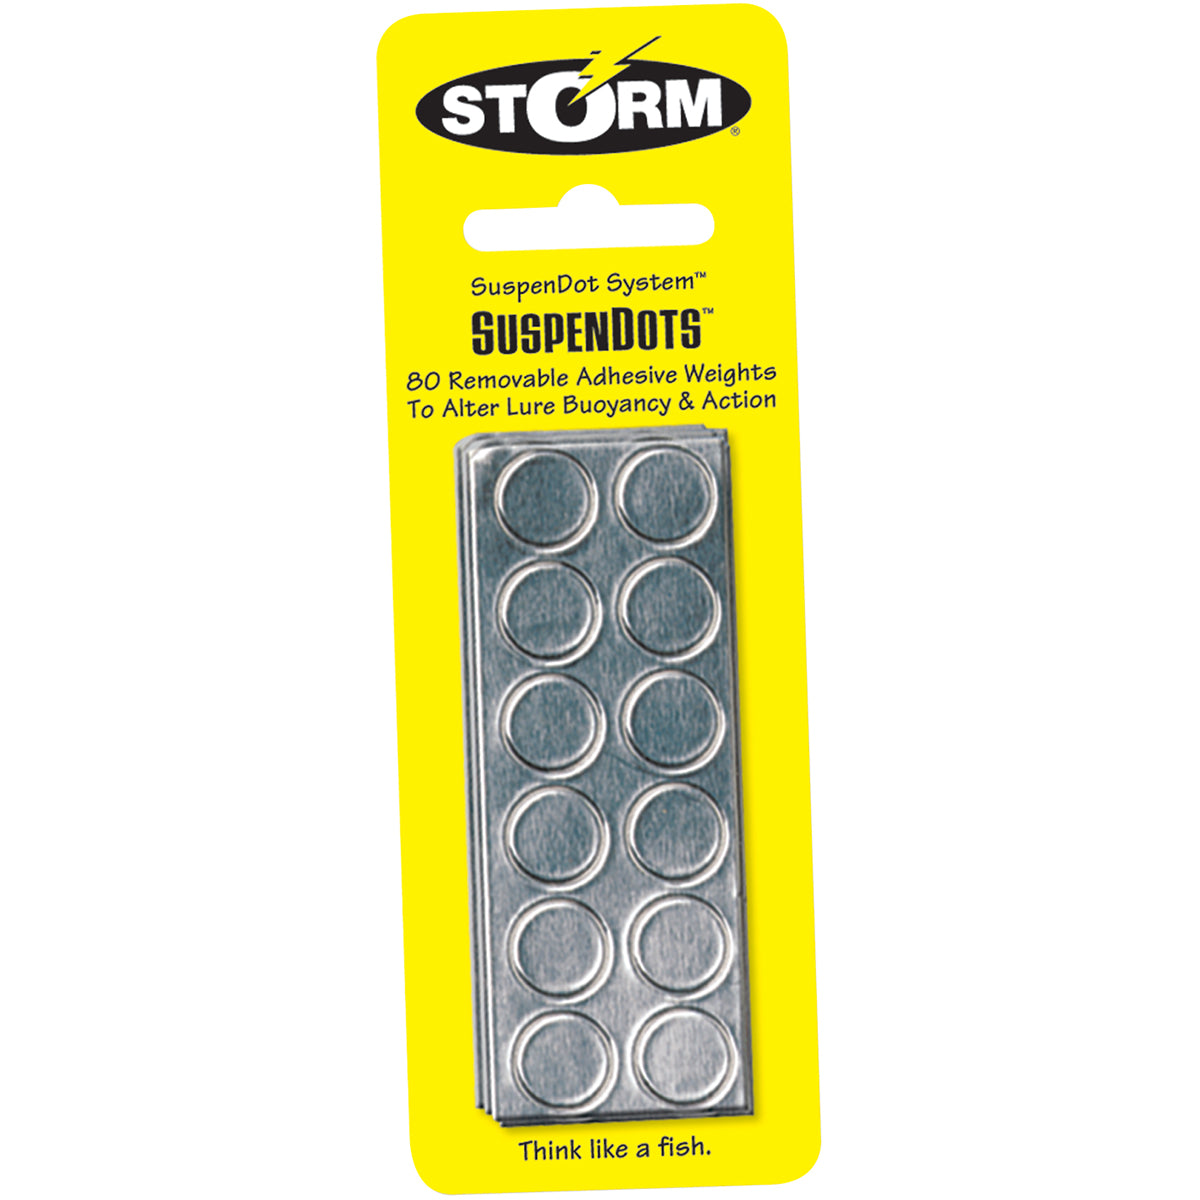 Storm SuspenDots Removable Adhesive Weights - 80 Count Storm